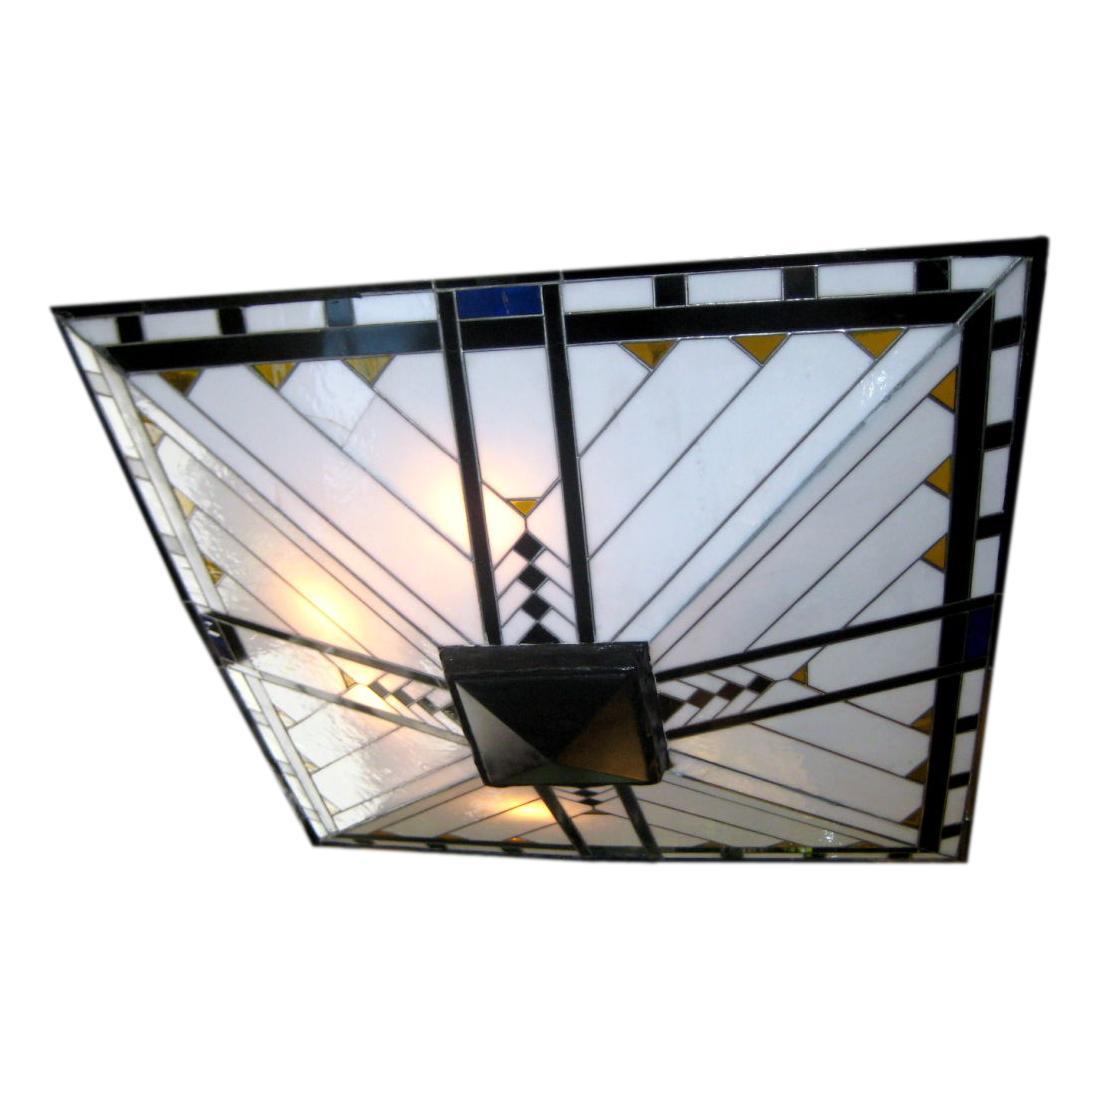 A circa 1930's French Art Deco leaded and stained glass light fixtures suspended from 4 stems and a square canopy.  8 chadelier lights.

Measurements:
Height: 36